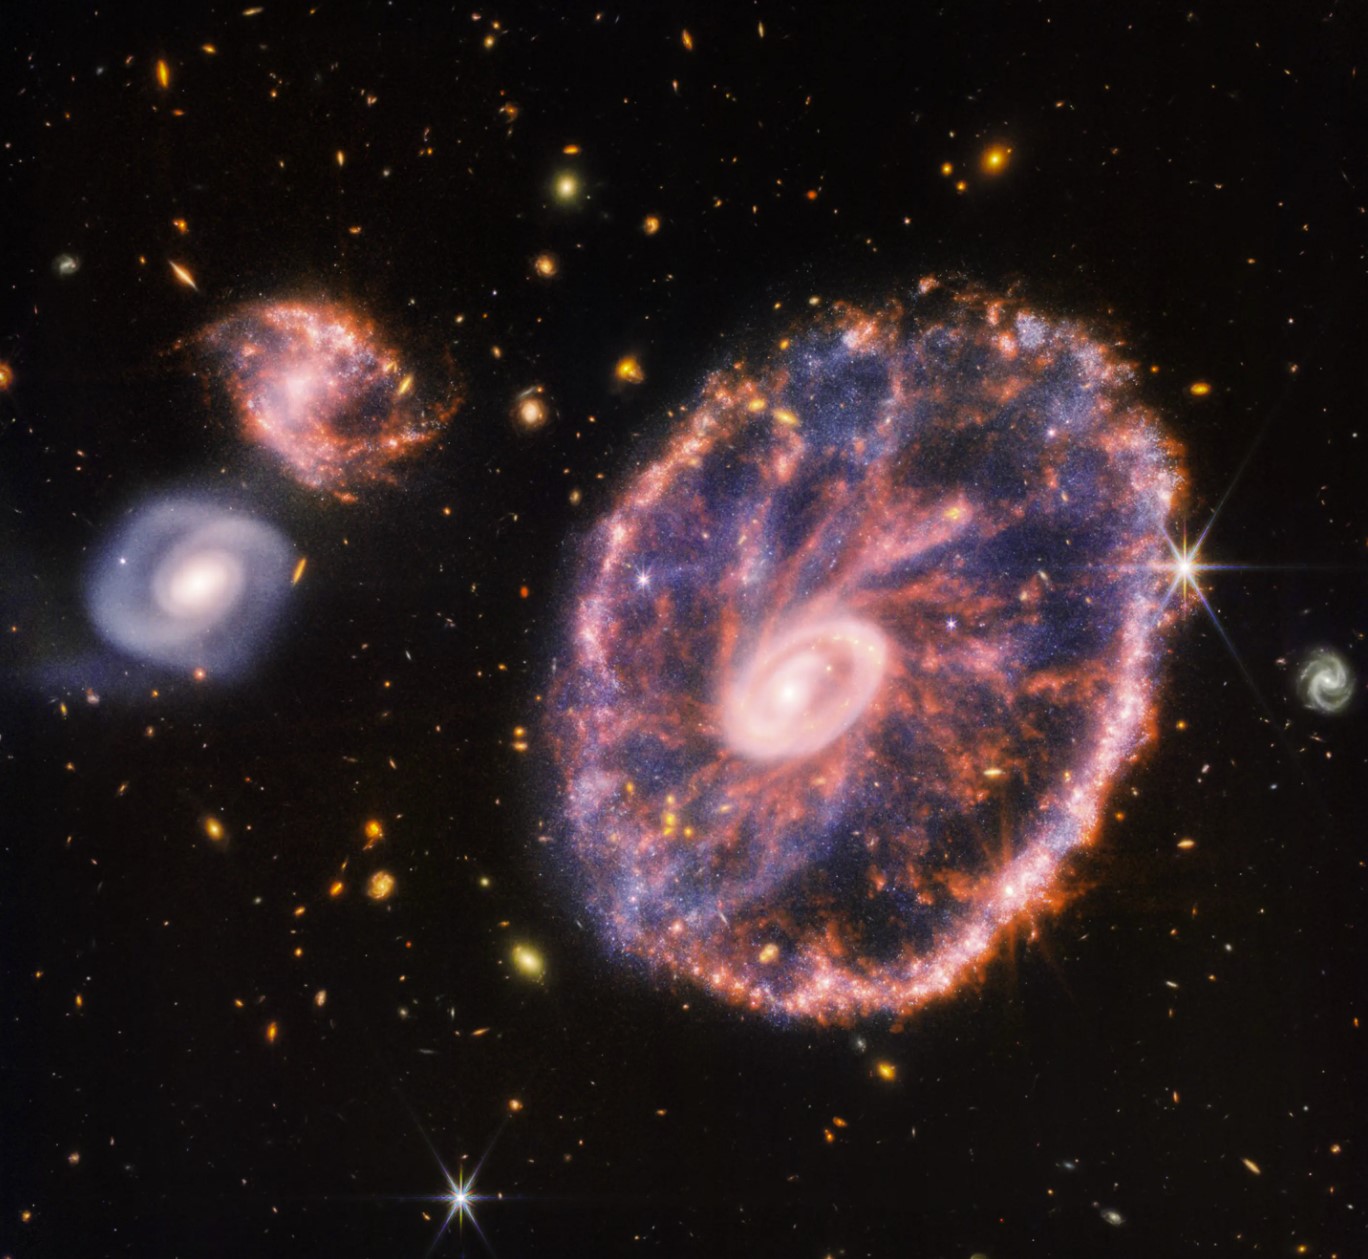 Stunning new photos of the Cartwheel Galaxy from James Webb Space Telescope